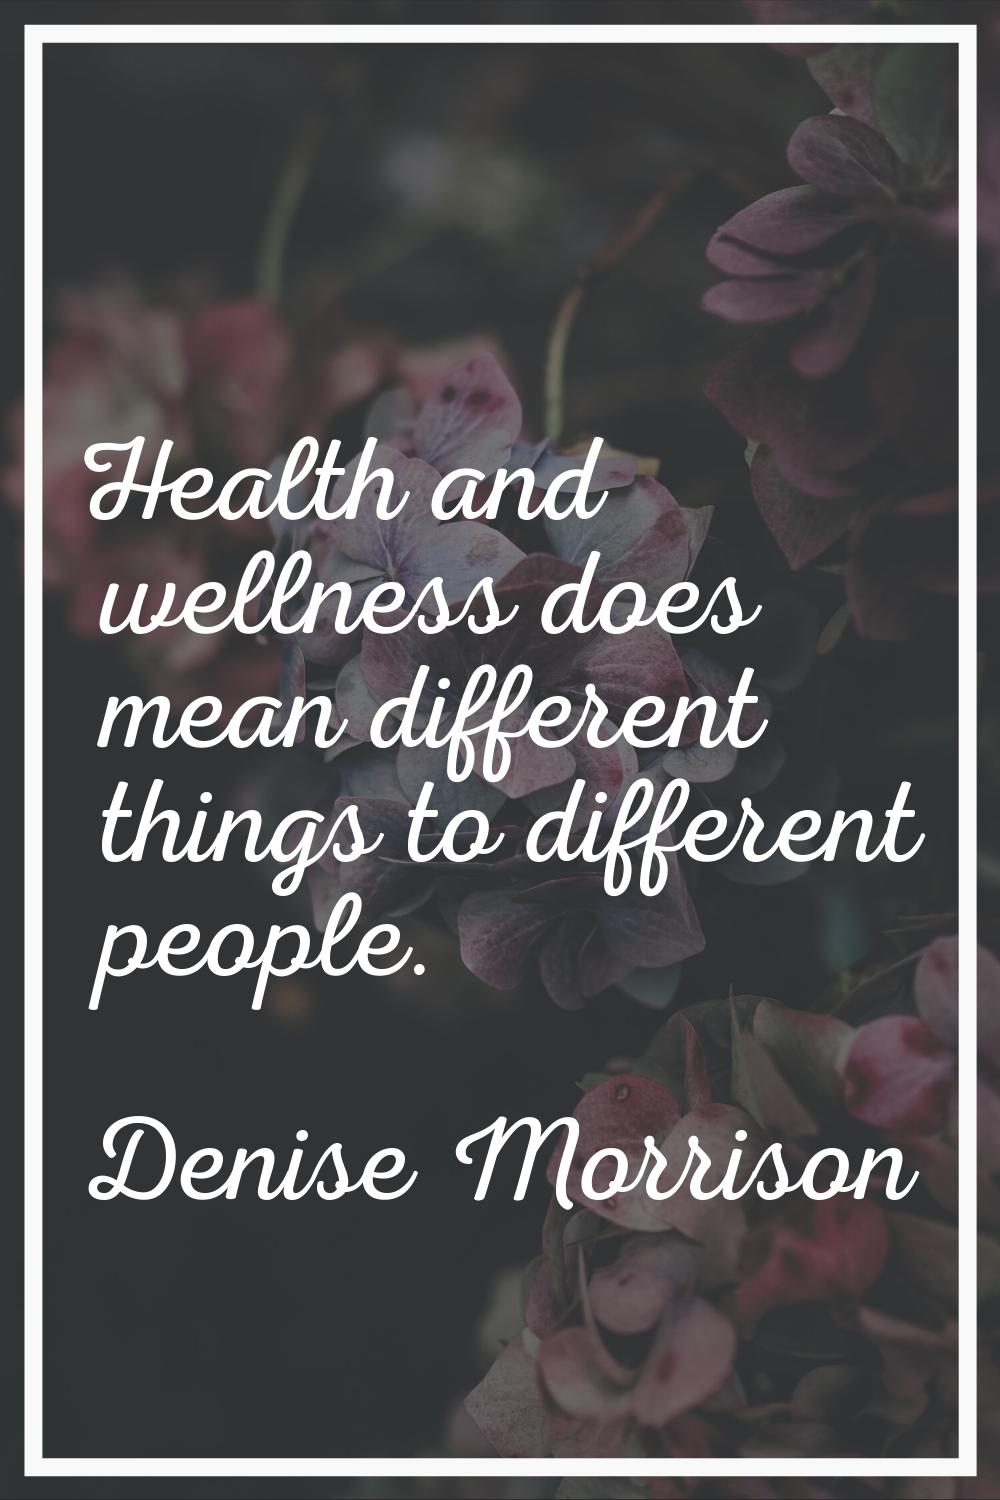 Health and wellness does mean different things to different people.